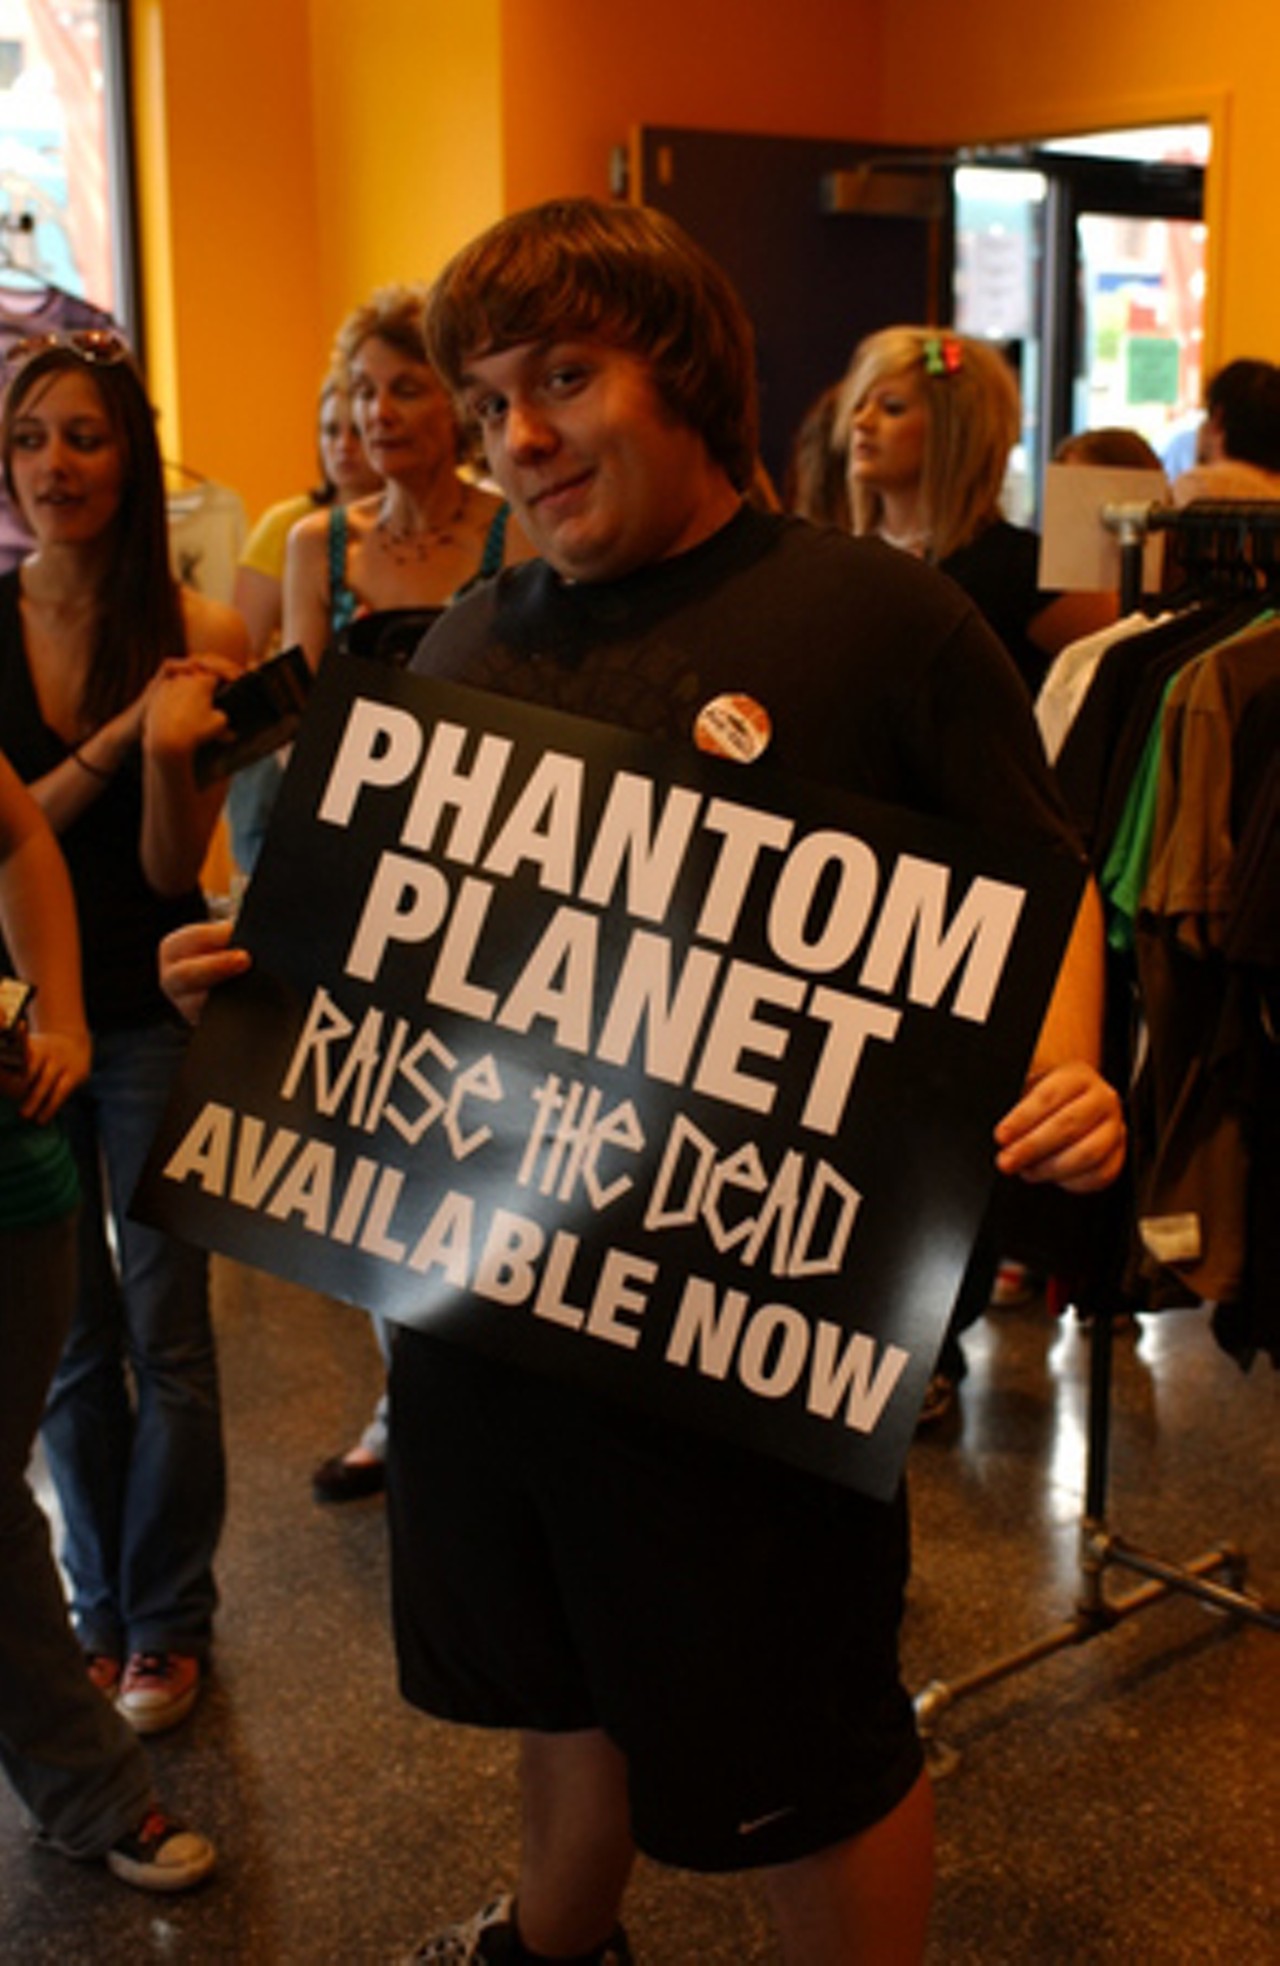 Bryan Carter shows his support for Phantom Planet while getting some merch.